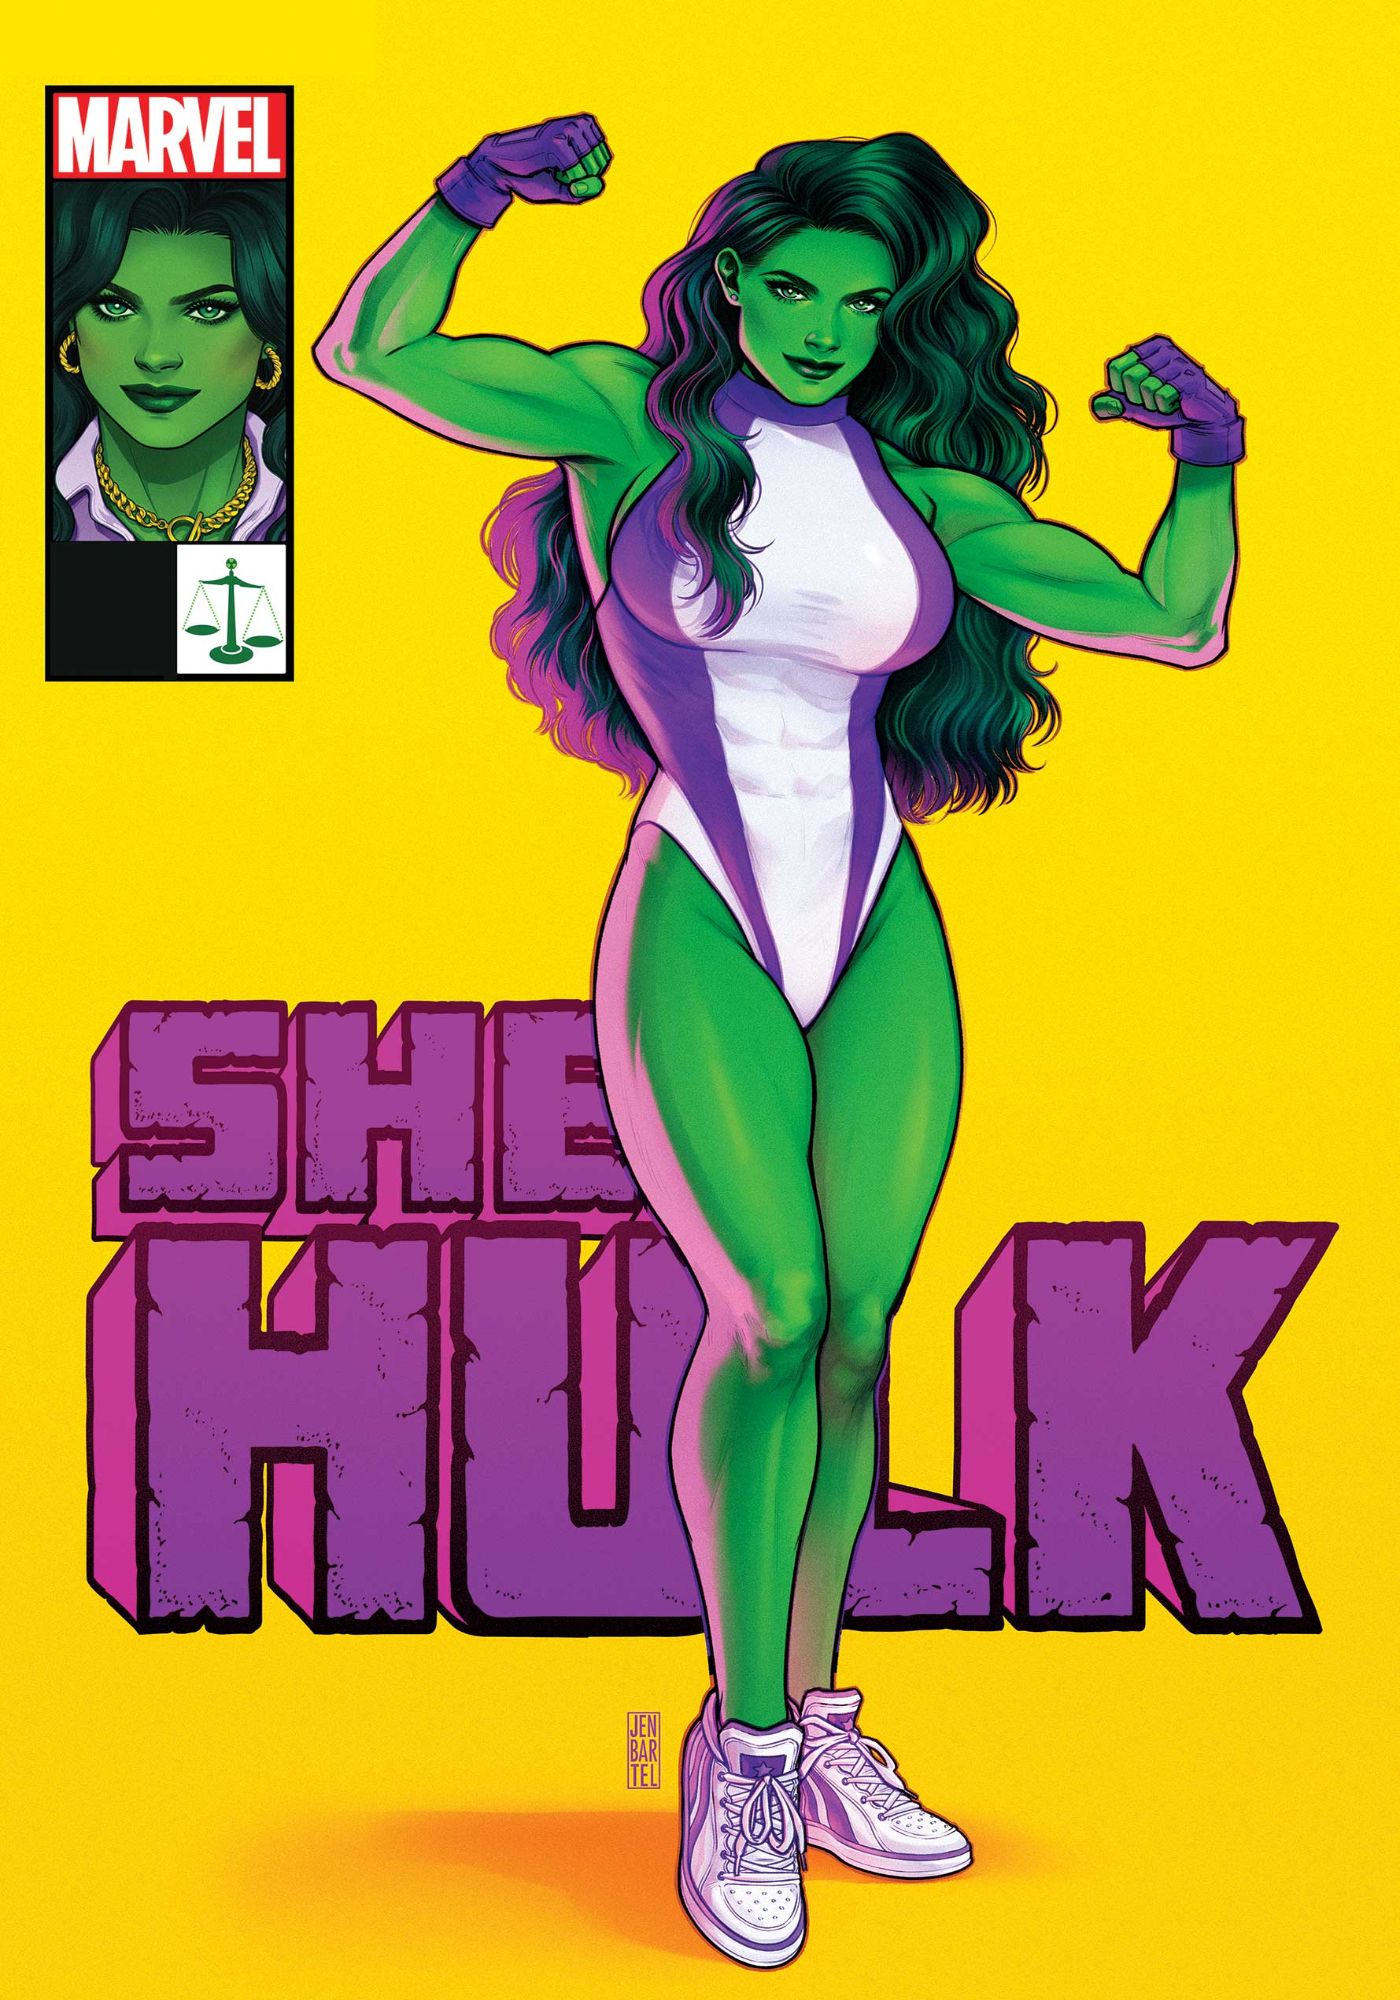 Marvel Brings Back Classic She-Hulk in First Look at New Series